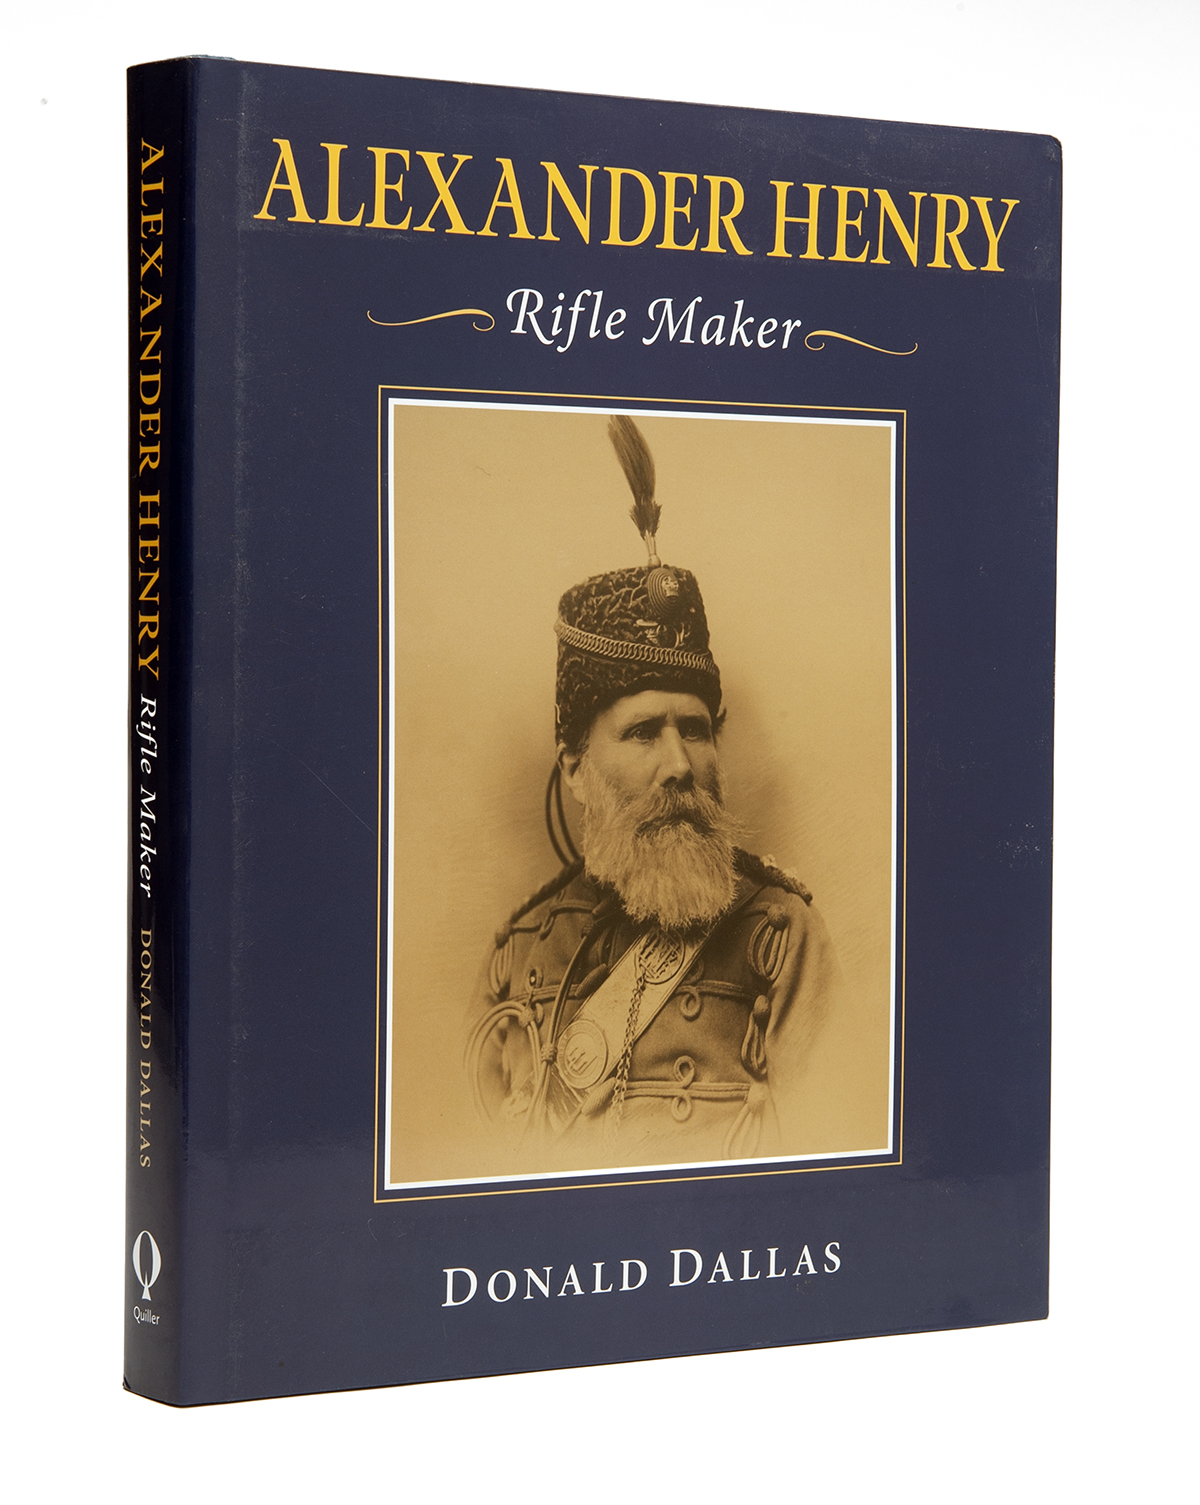 DONALD DALLAS, 'ALEXANDER HENRY - RIFLE MAKER', limited edition no. 21 of 750, forward by Richard